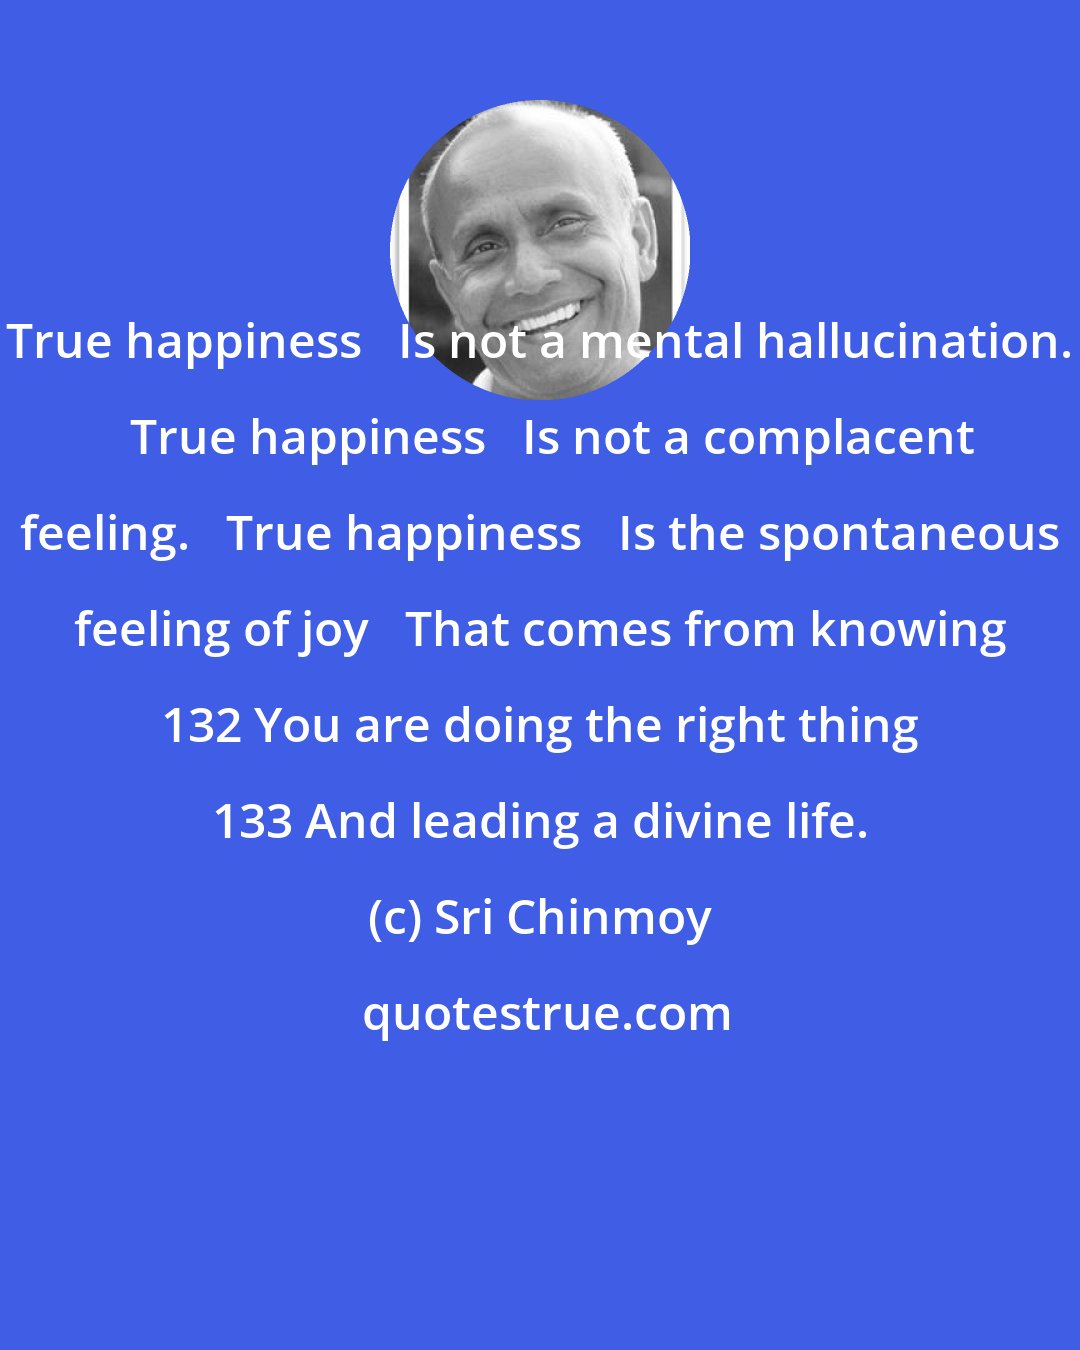 Sri Chinmoy: True happiness   Is not a mental hallucination.   True happiness   Is not a complacent feeling.   True happiness   Is the spontaneous feeling of joy   That comes from knowing 132 You are doing the right thing 133 And leading a divine life.